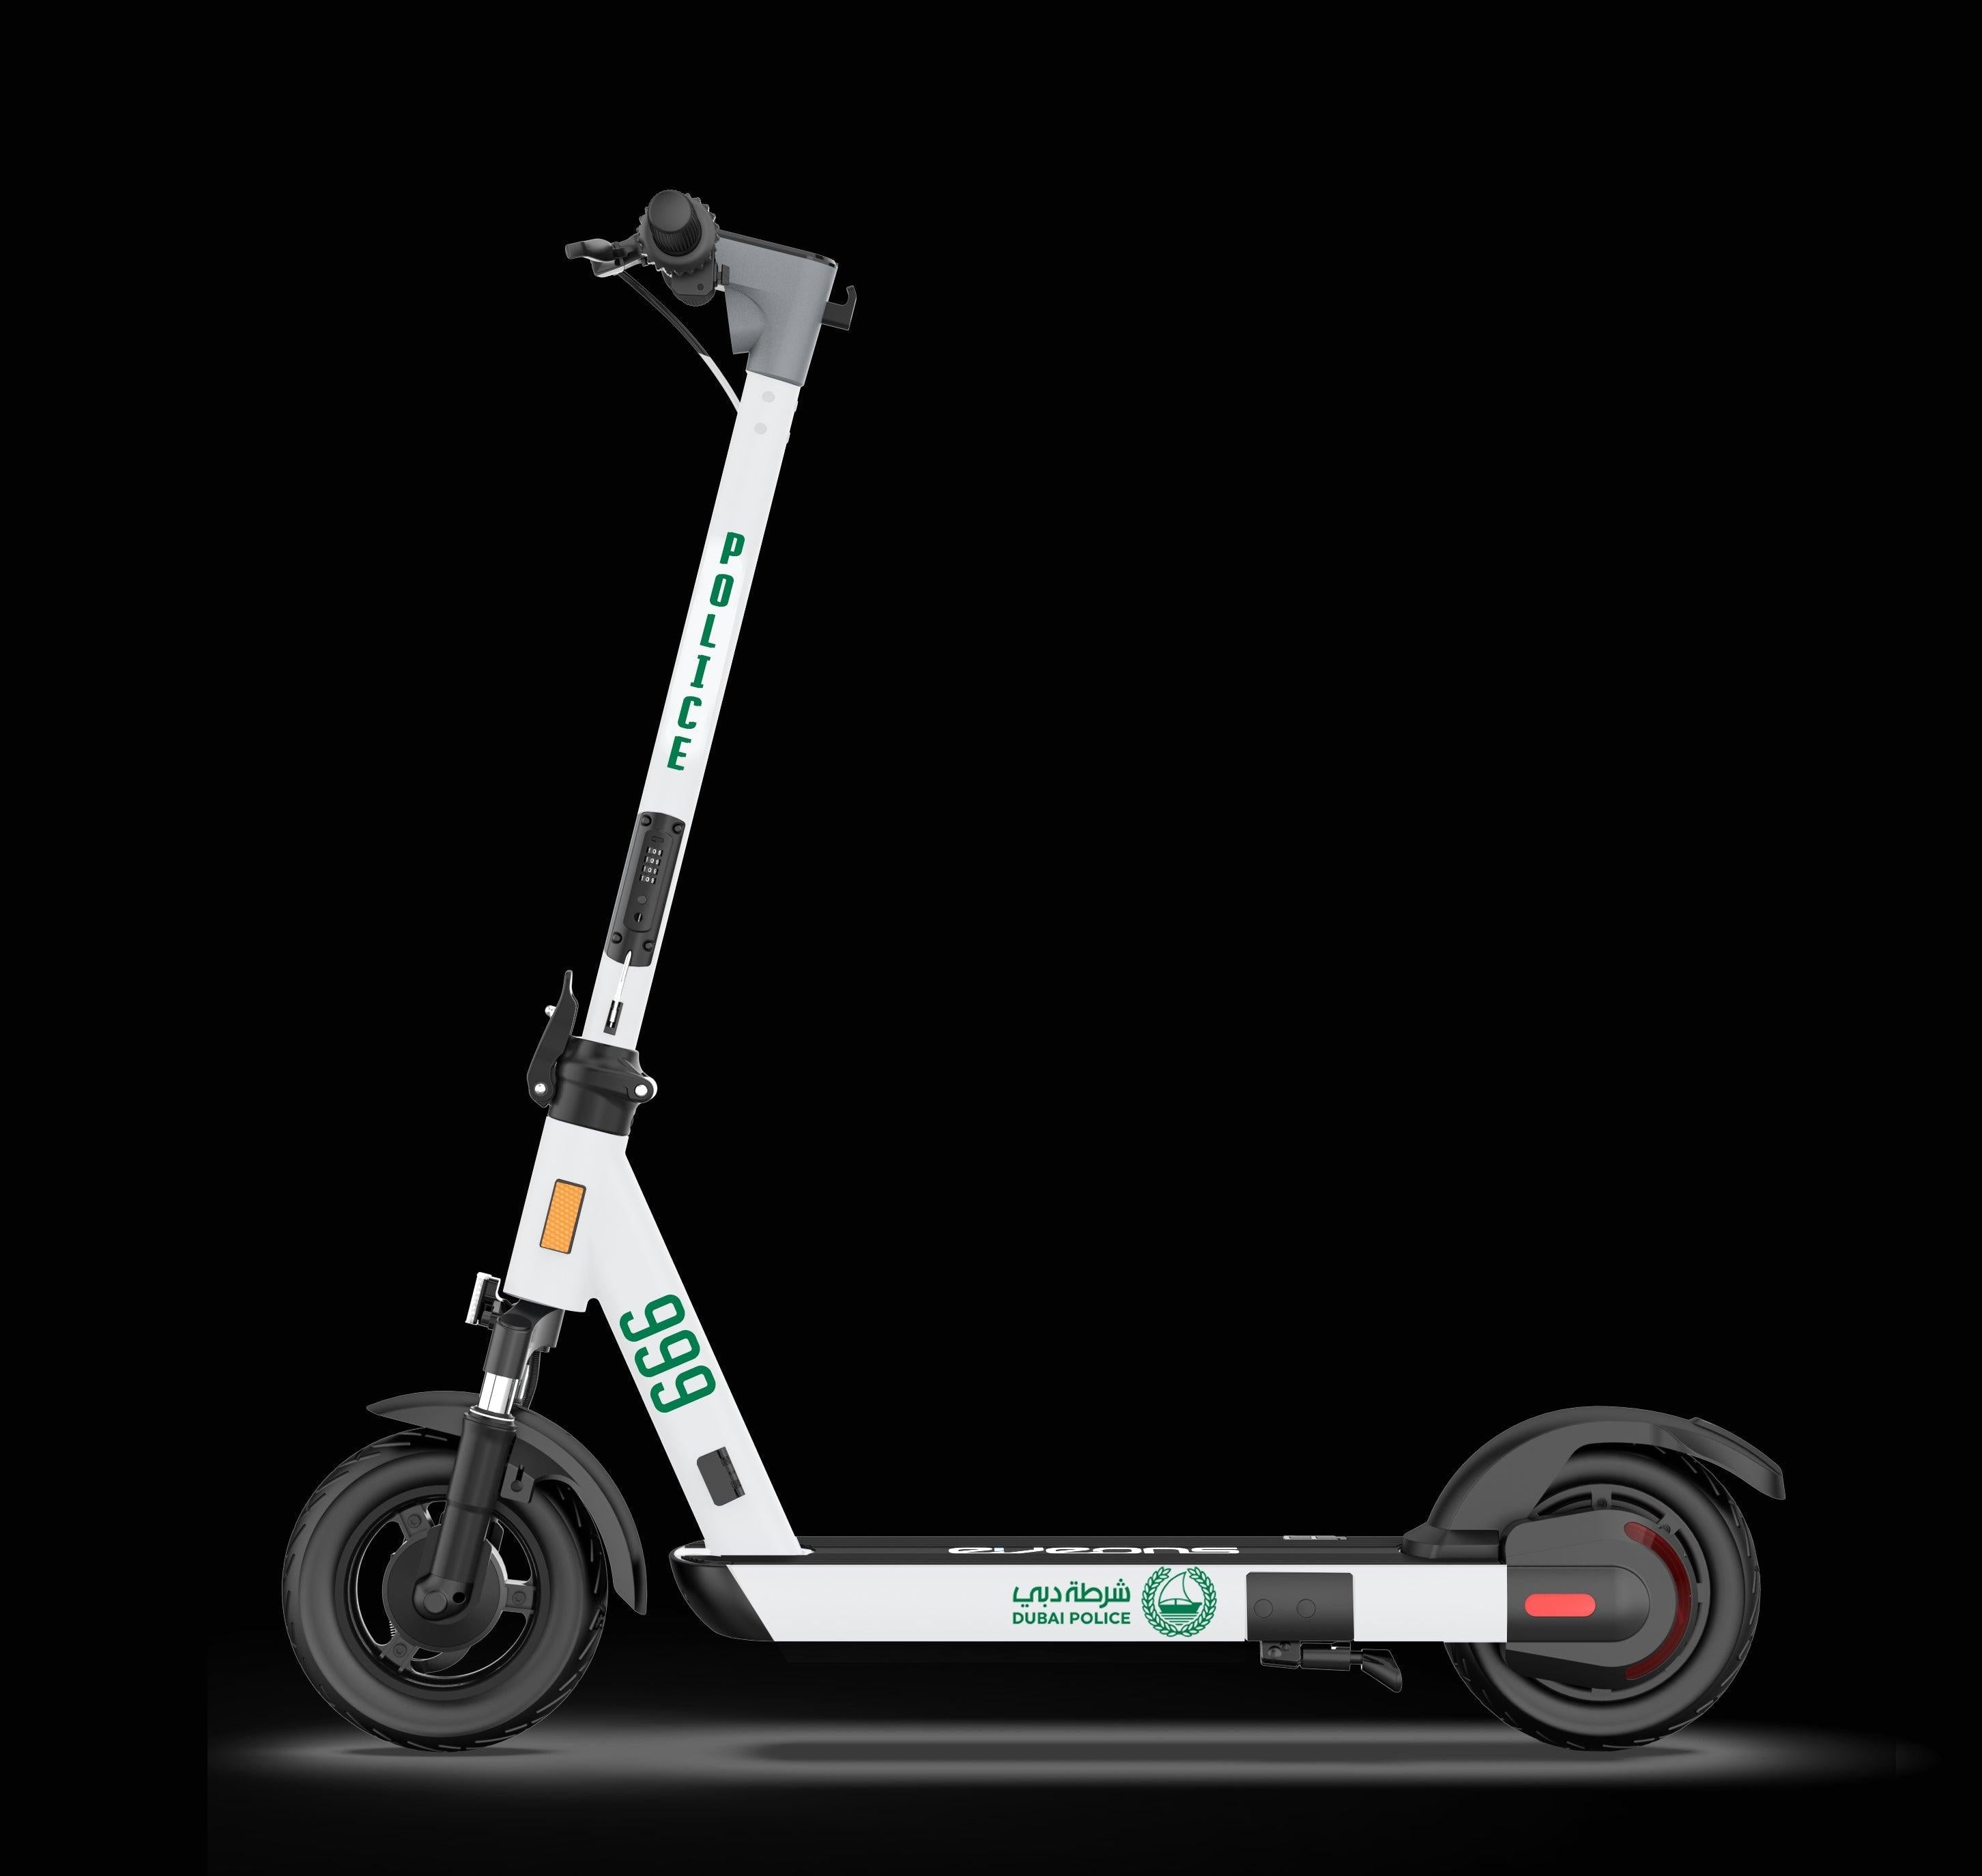 Why it’s better than a bike - Eveons Mobility Systems